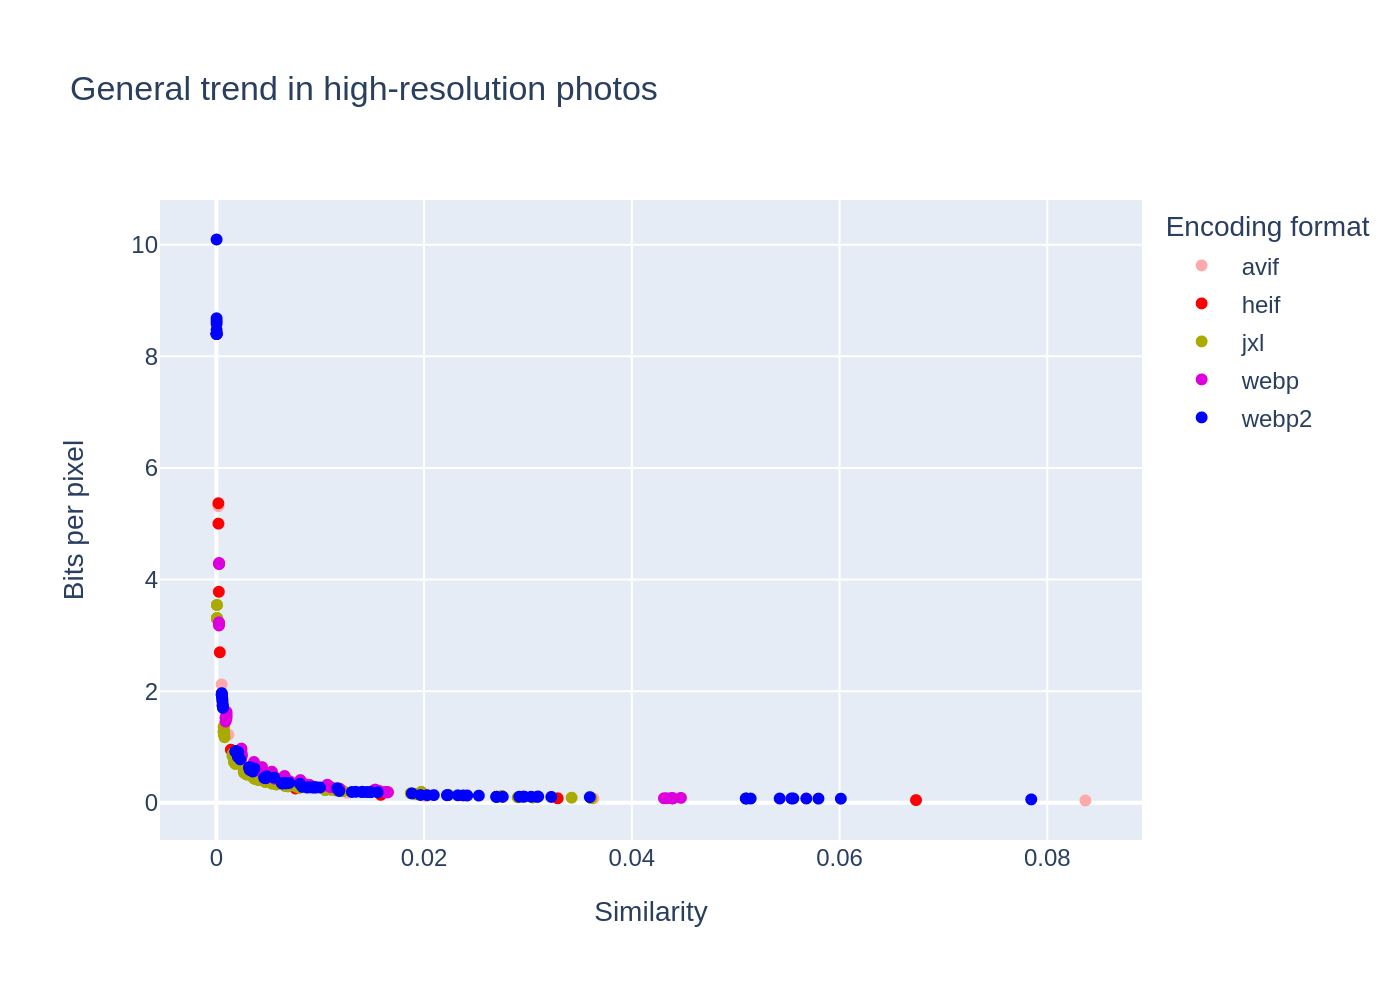 General trend towards high-resolution photos, compression ratio as a function of quality for different image formats